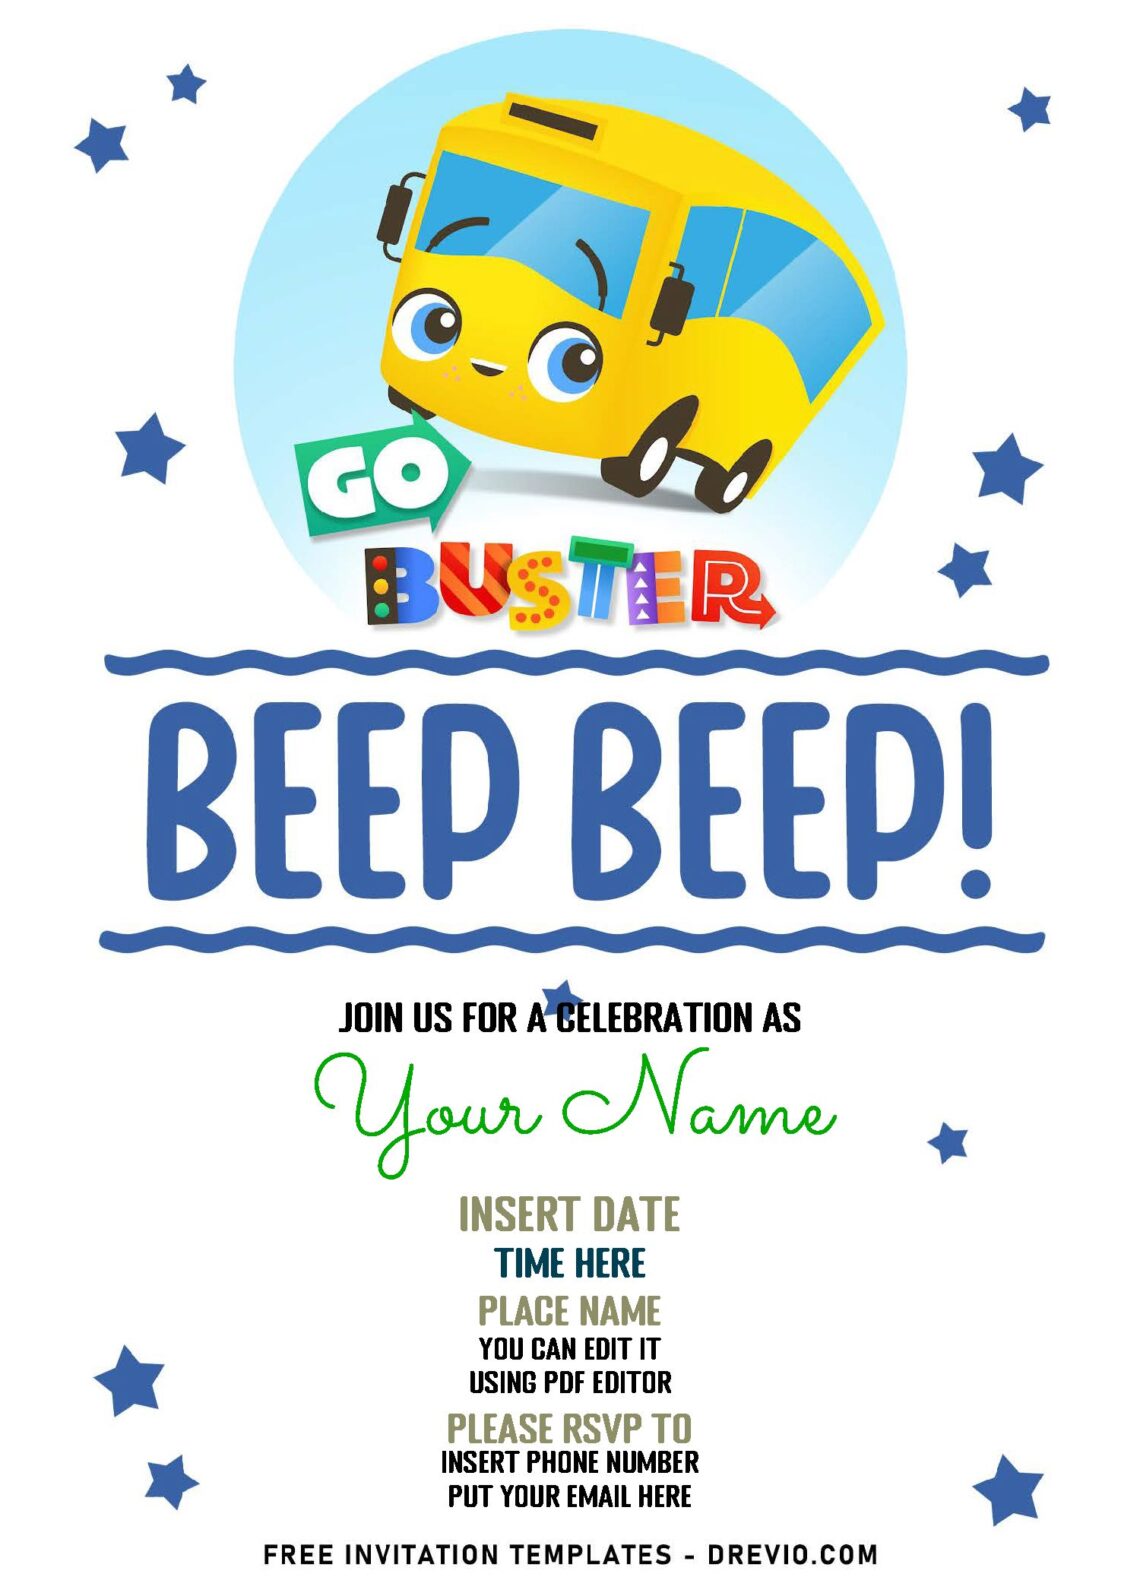 (Free Editable PDF) Fun Day With Buster And Scouts Go Buster Birthday Invitation Templates with cute stars